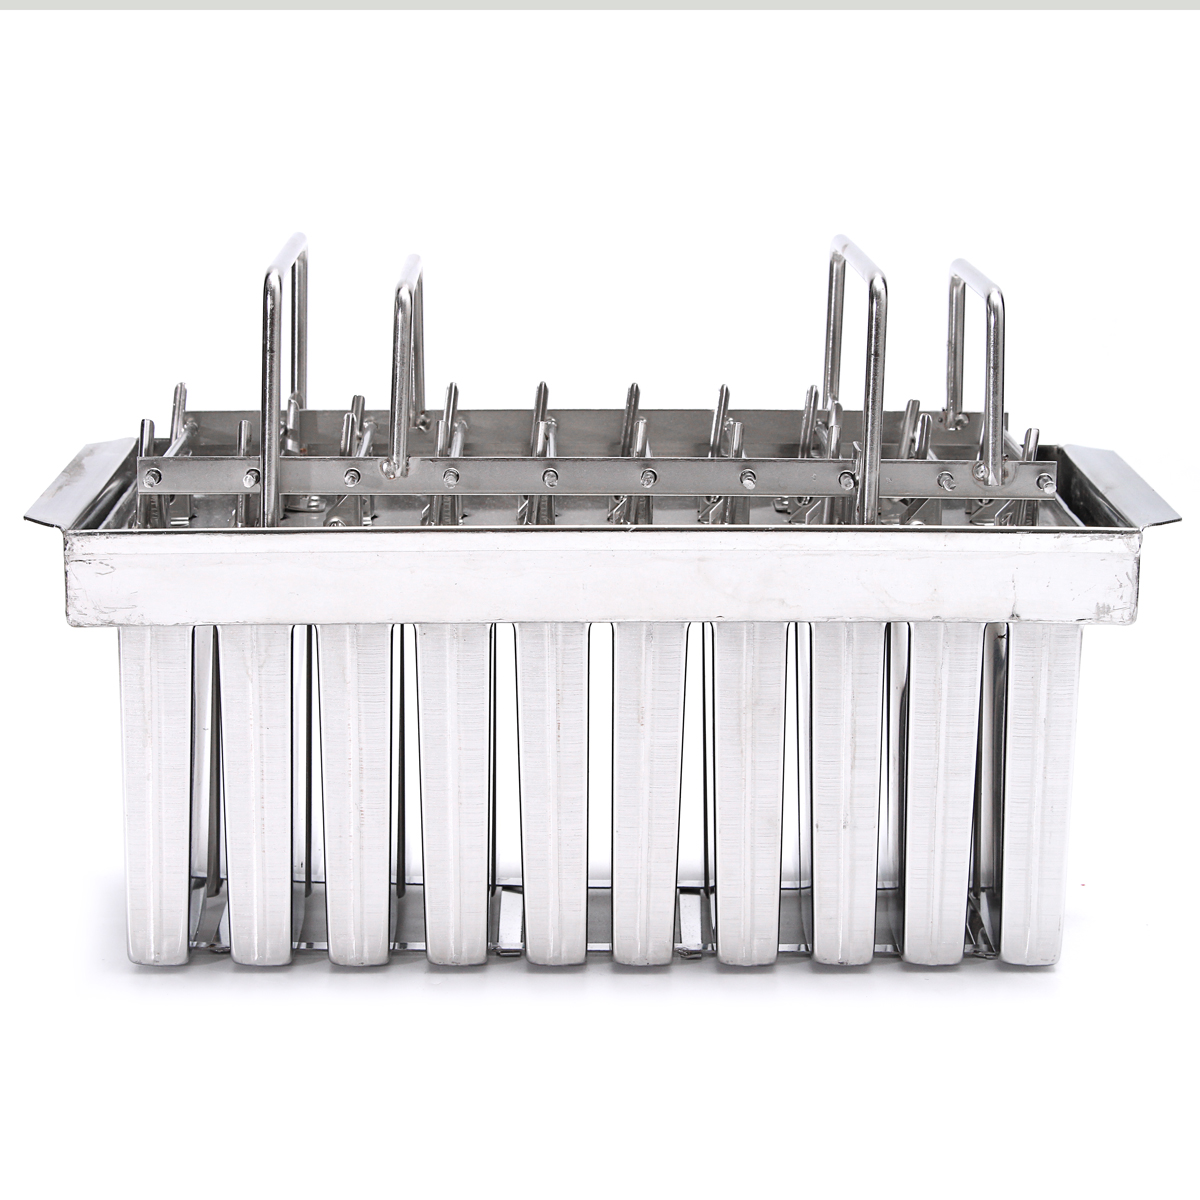 Stainless-Steel-Mould-20-Cavity-115g-Ice-Pop-Maker-Mold-Lolly-Popsicle-Square-Ice-Cream-Stick-Holder-1339666